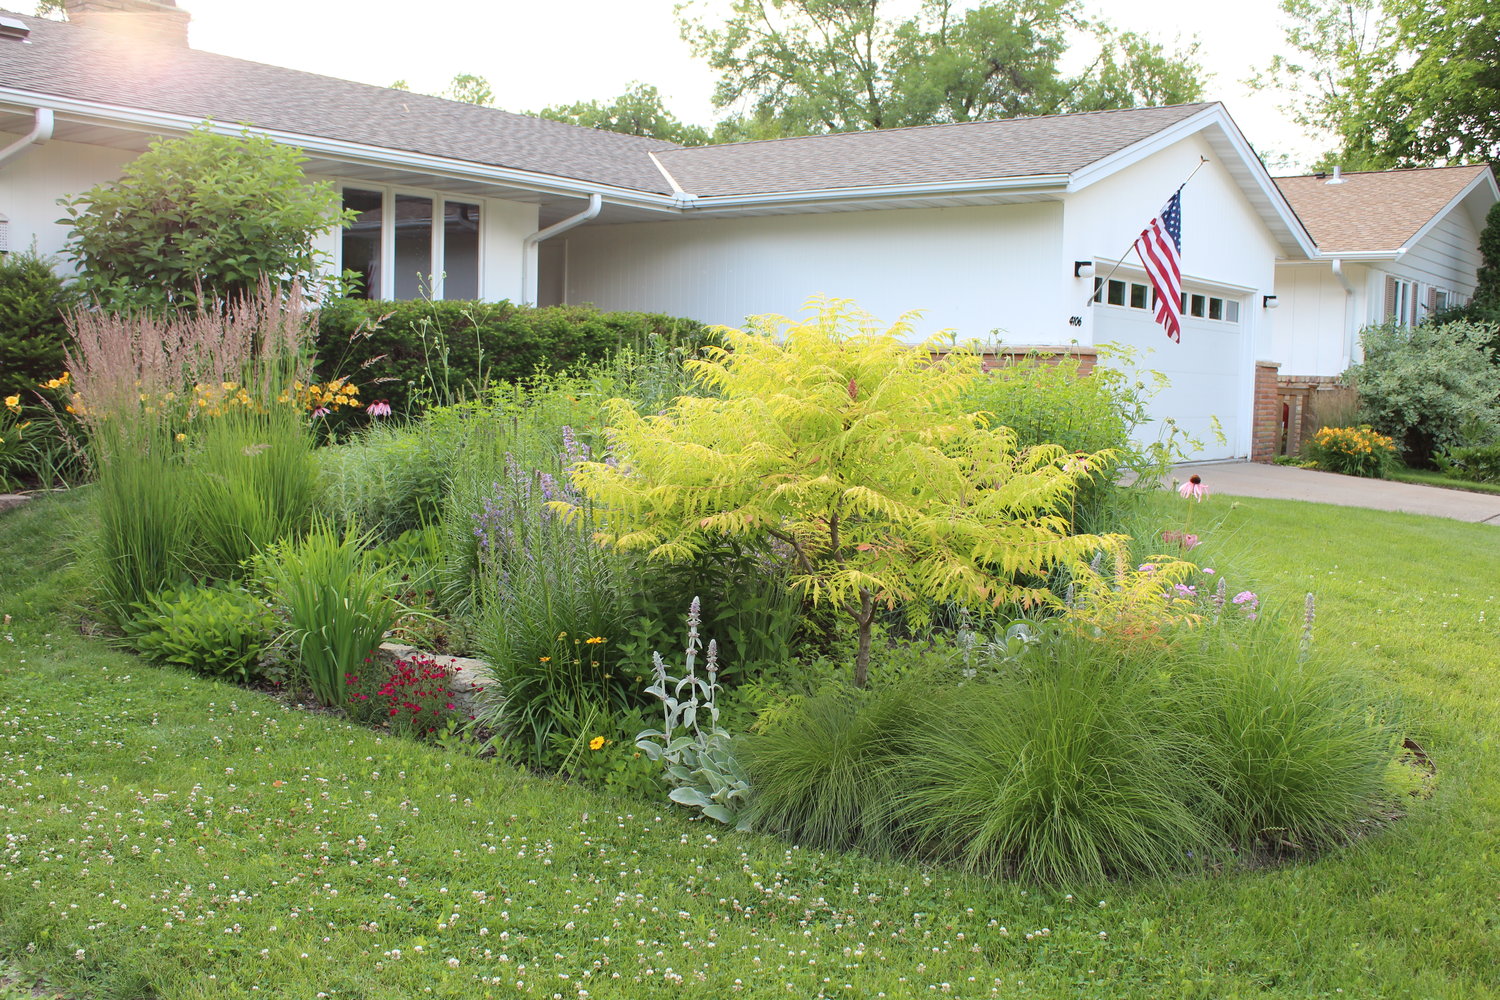 Rain gardens help hold water on site. They're a beautiful way to keep water clean.